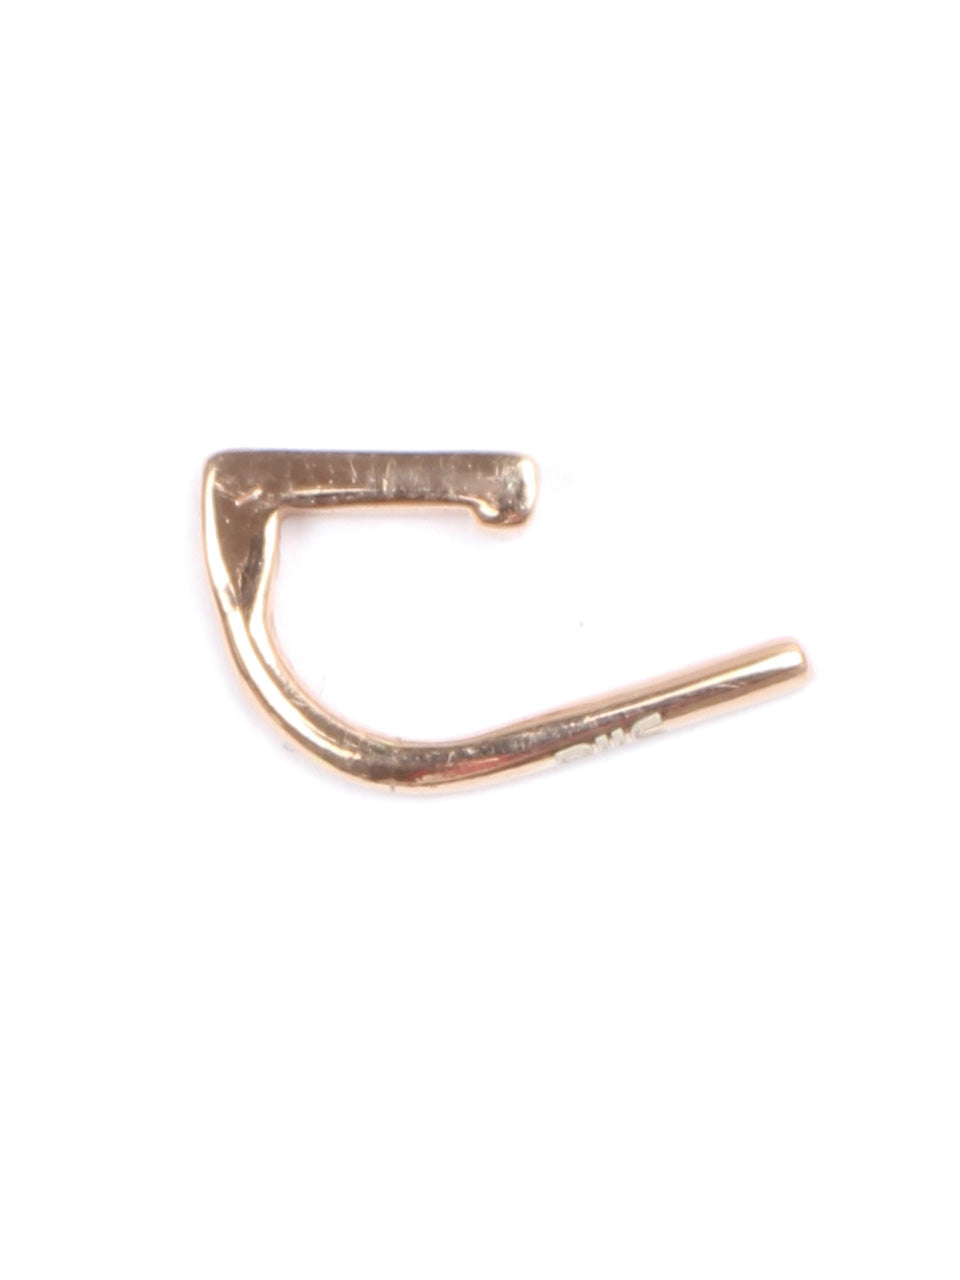 Small Staple (rose gold)